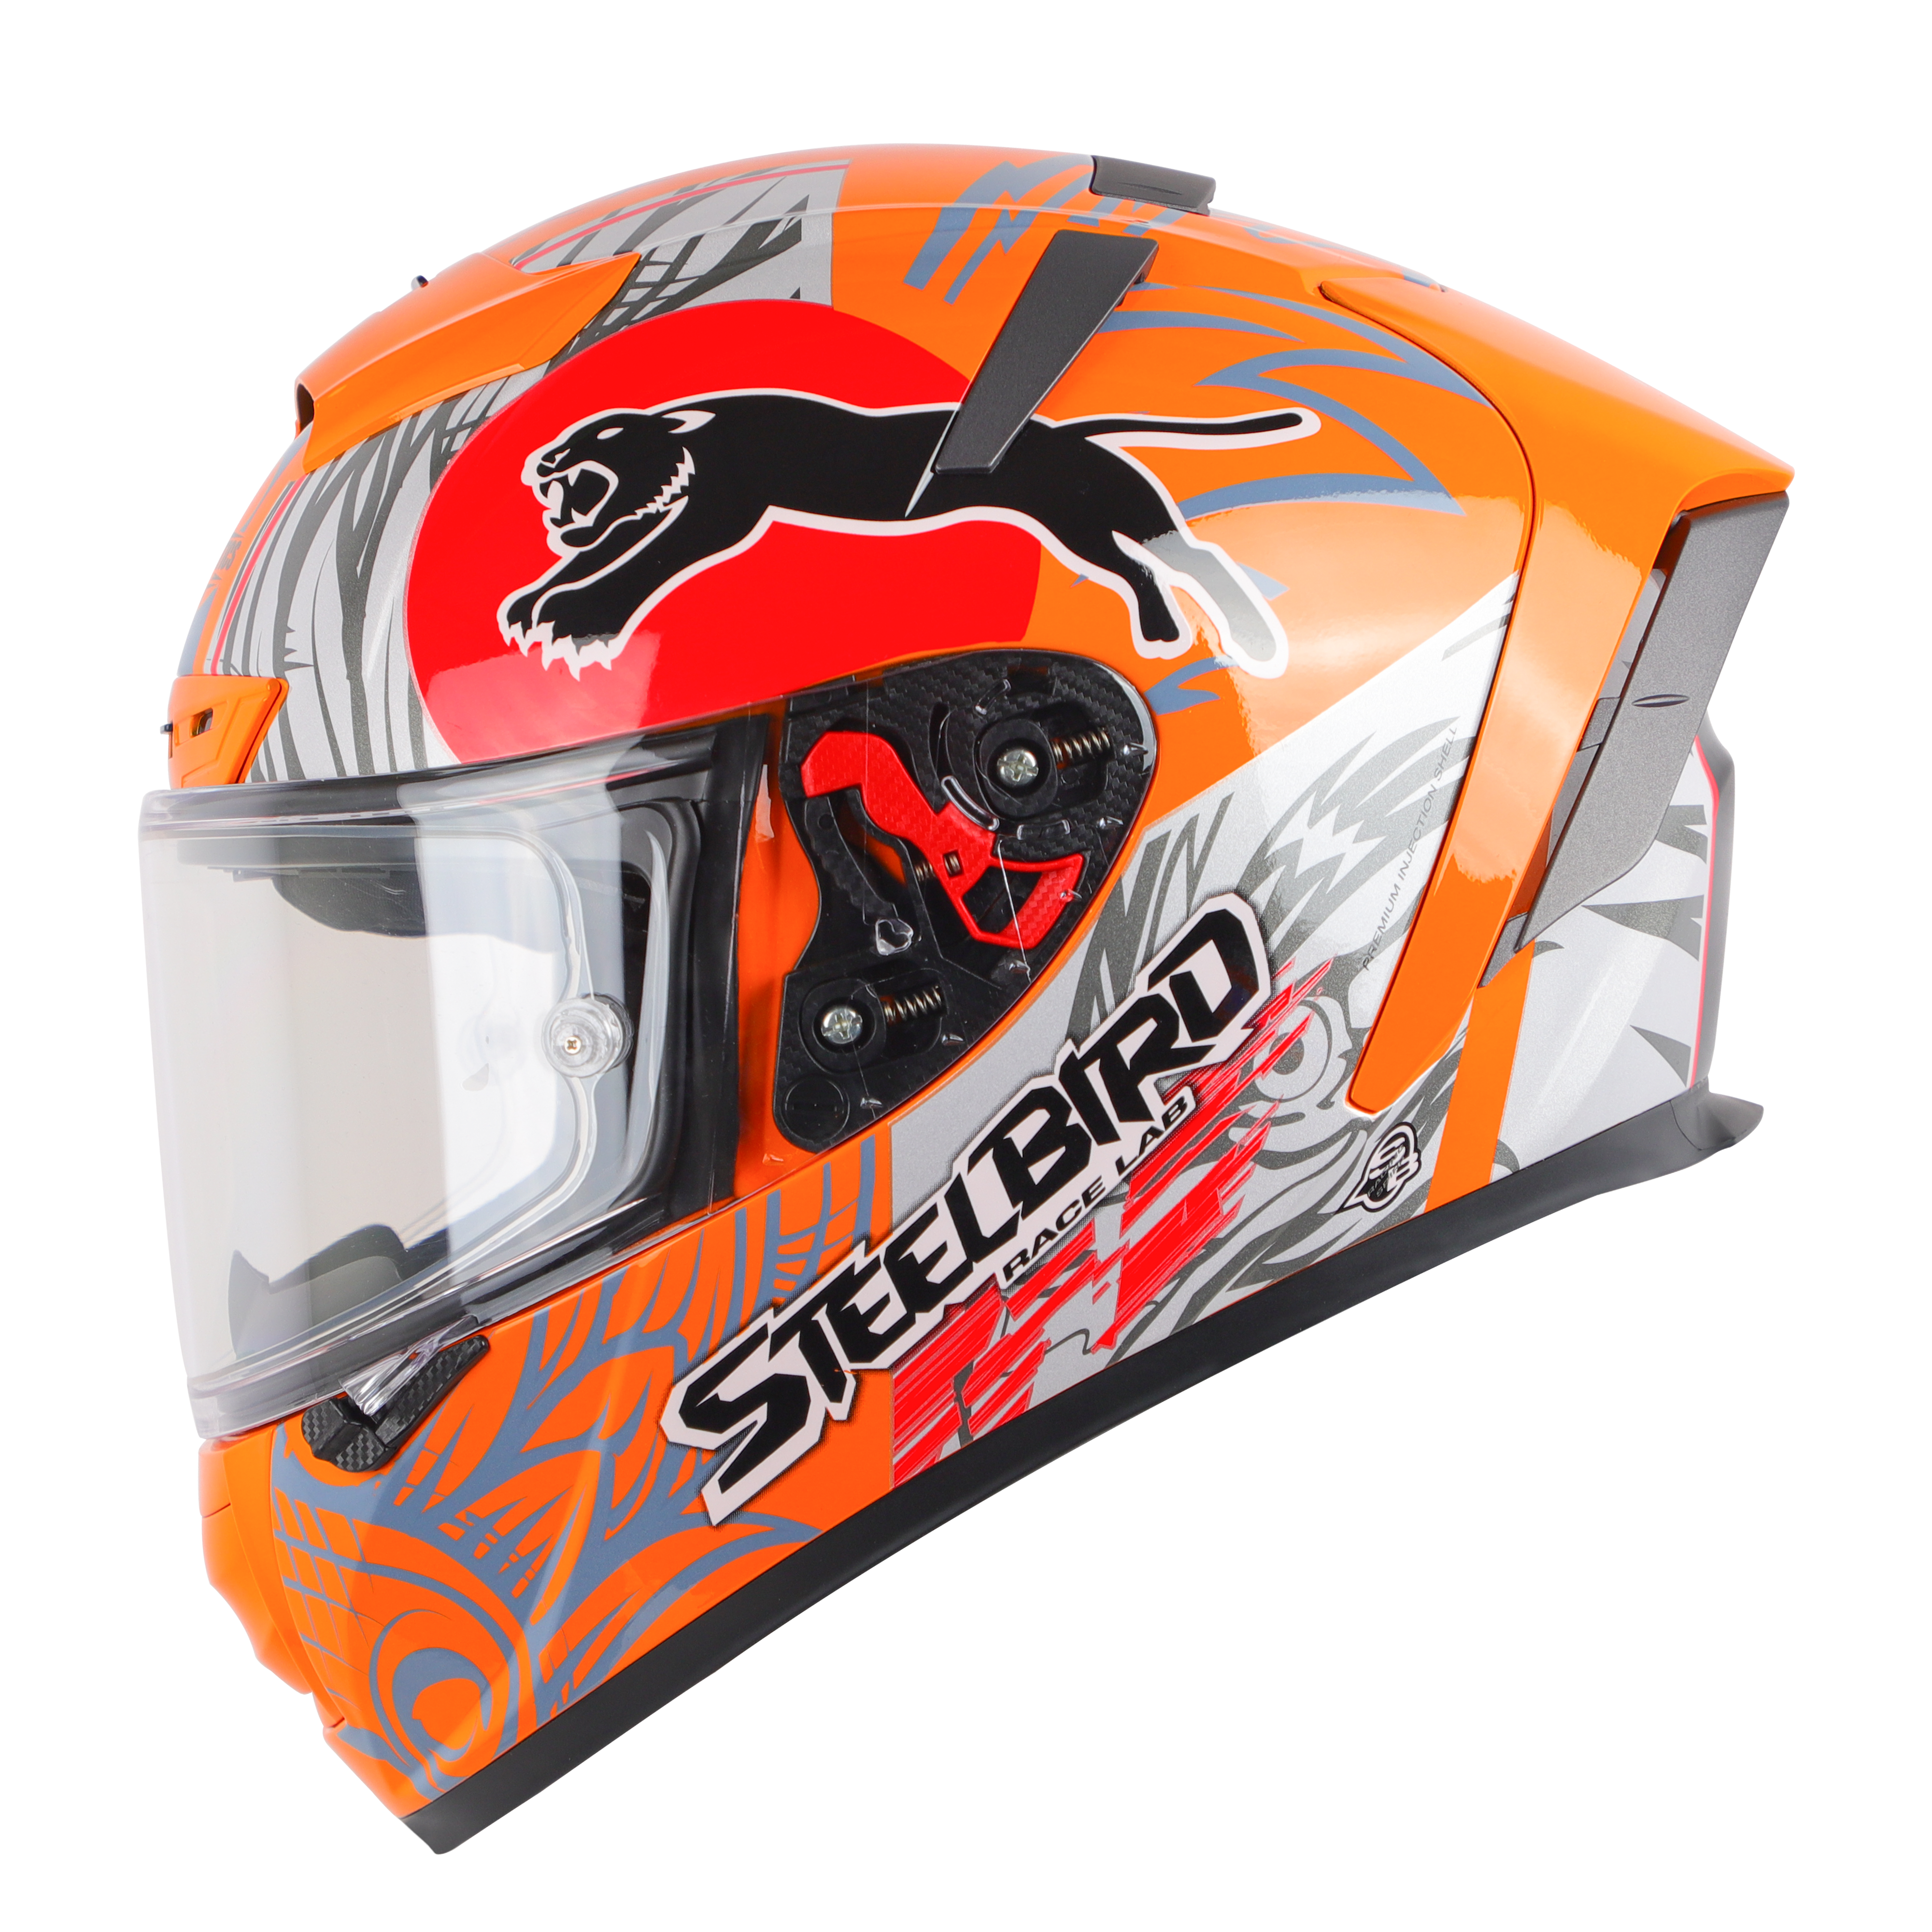 SA-5 DOT FLYDECK MAT ORANGE WITH RED (WITH ANTI-FOG SHIELD VISOR) 